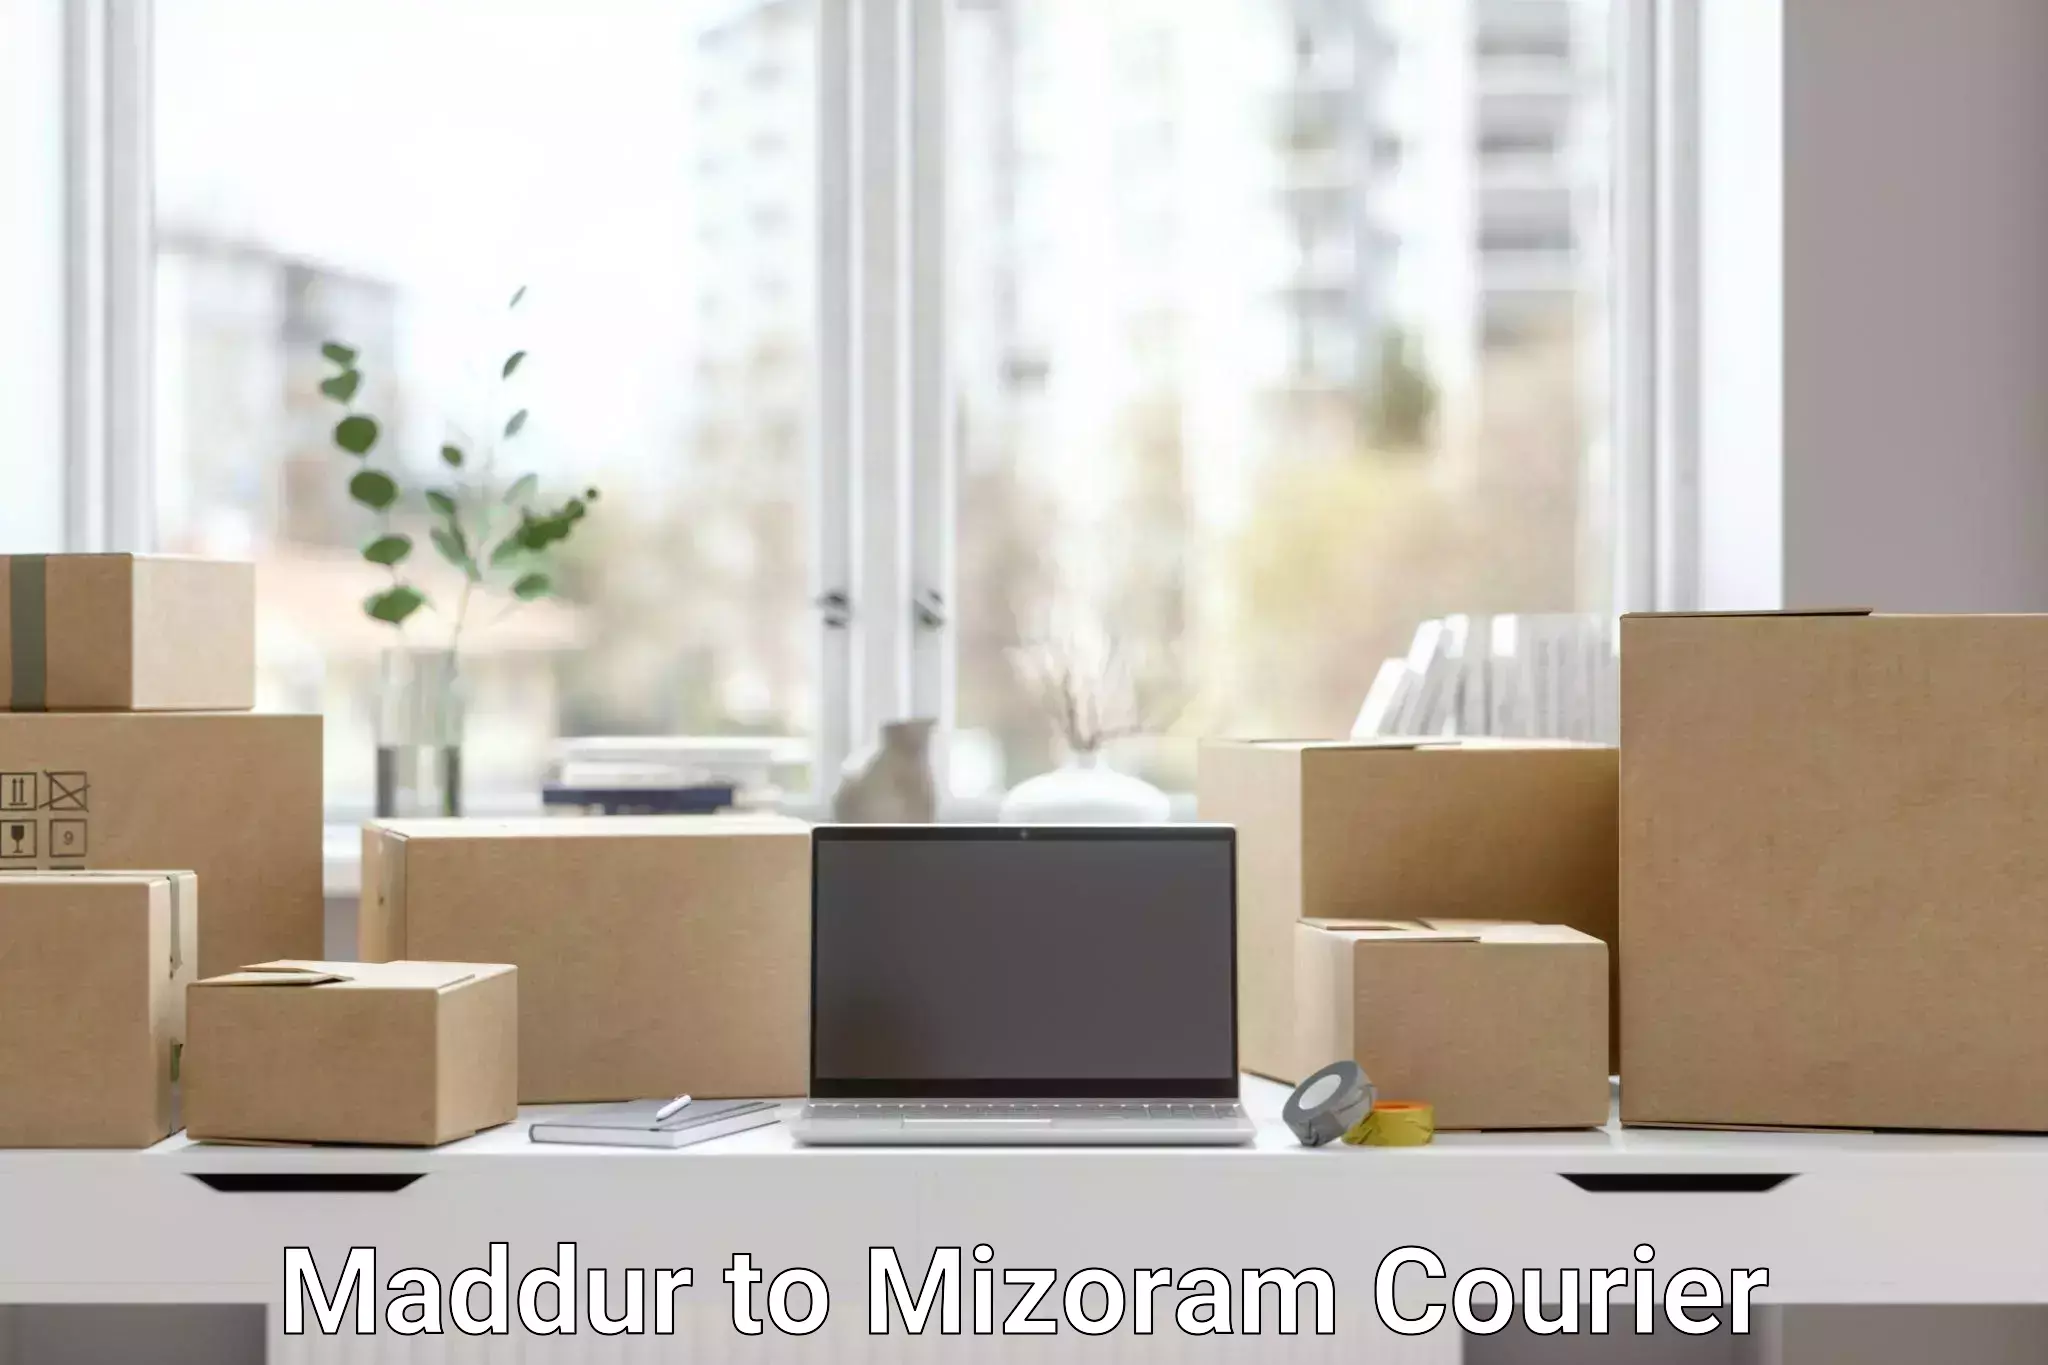 Online package tracking Maddur to Mizoram